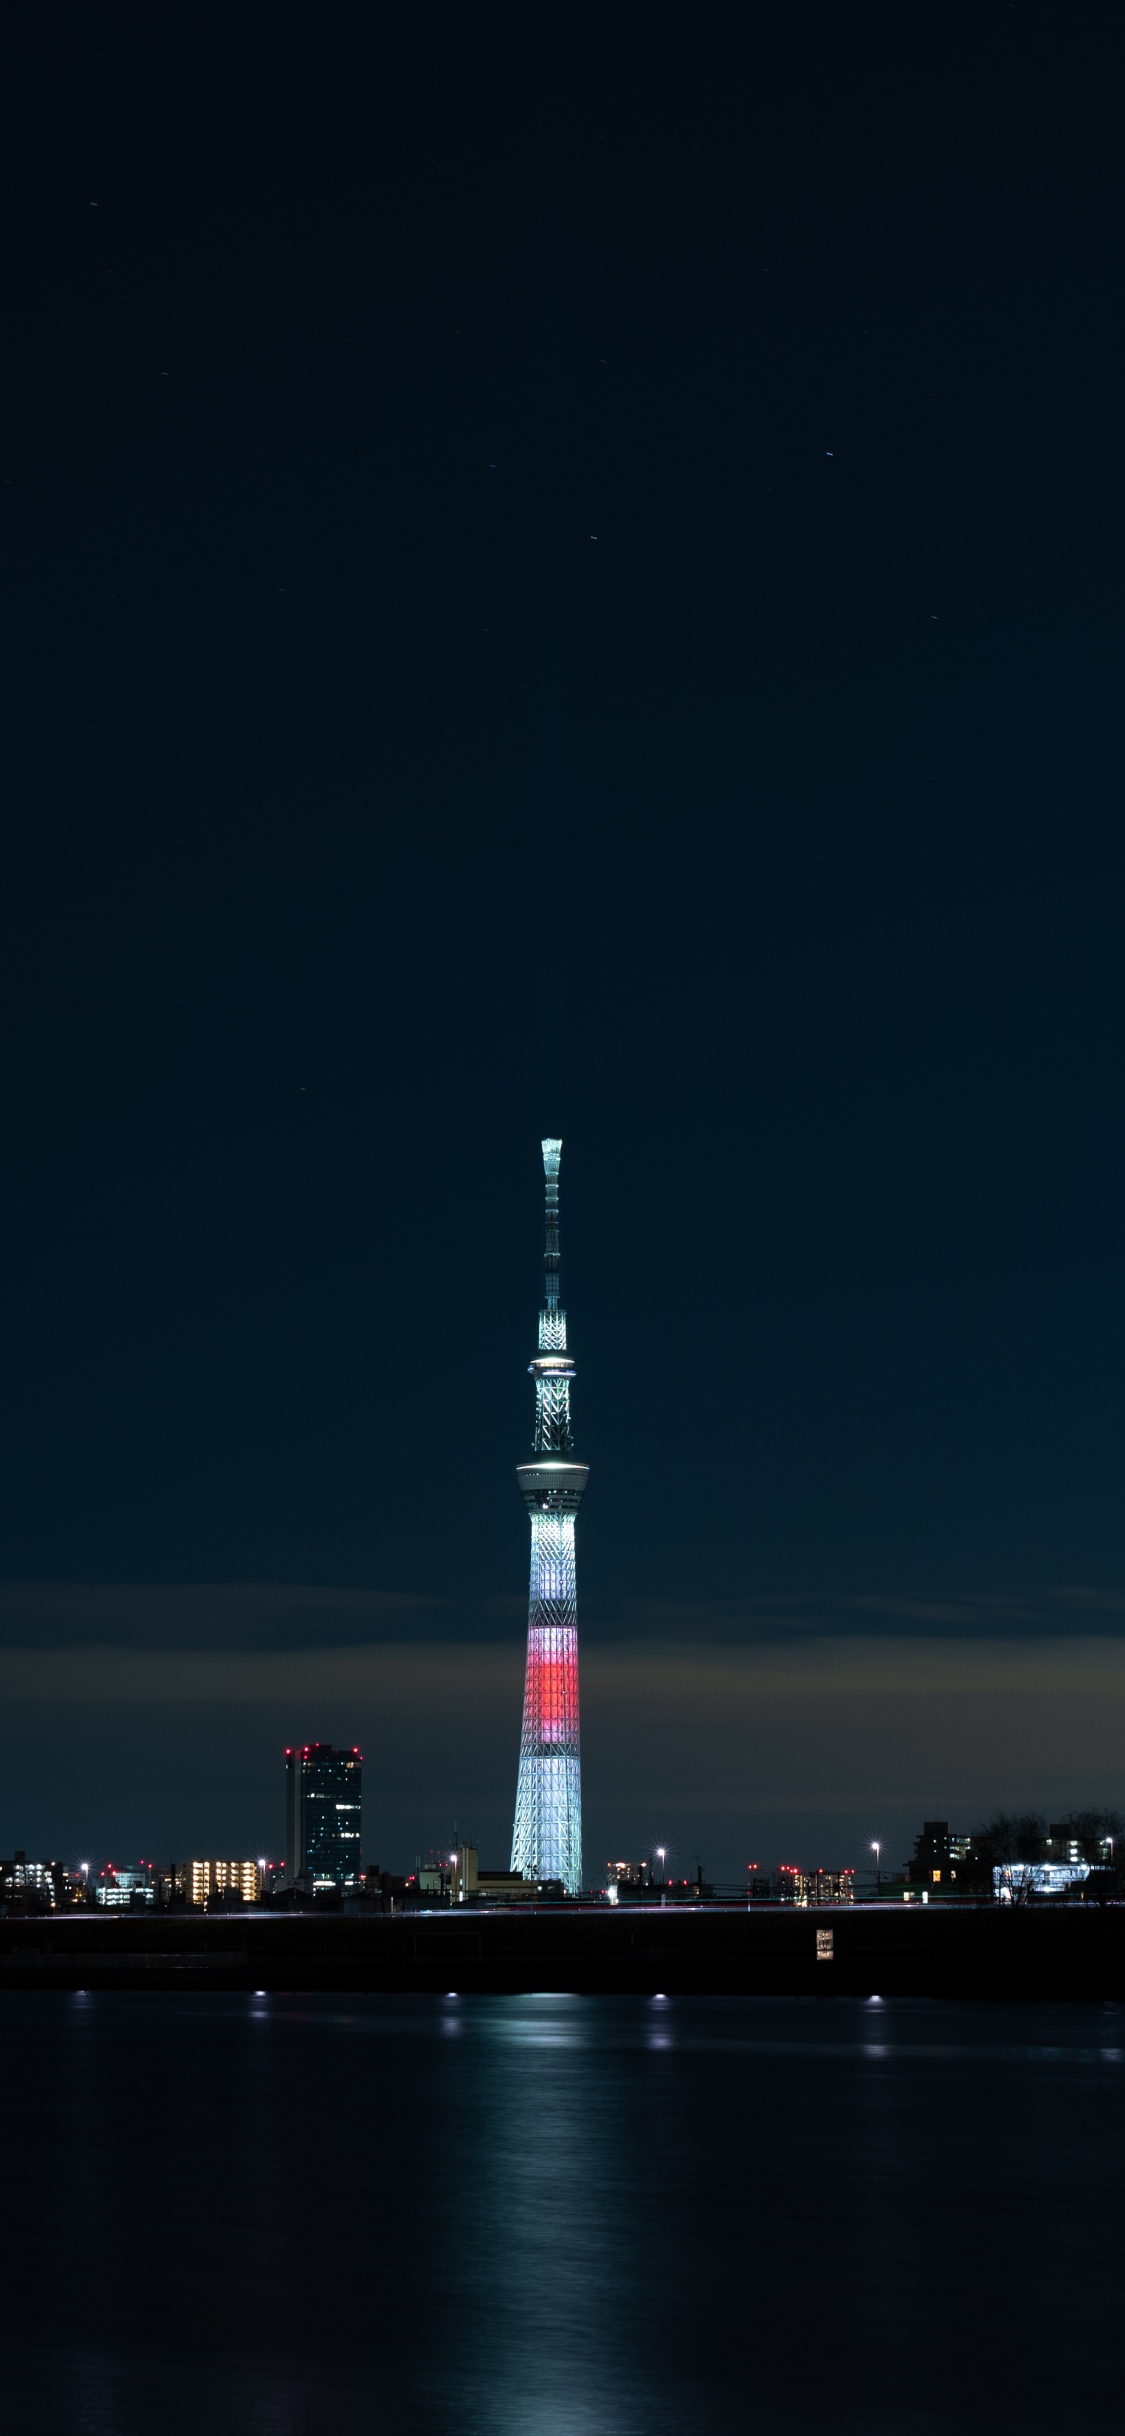 White and Red Tower Near Body of Water During Night Time. Wallpaper in 1125x2436 Resolution